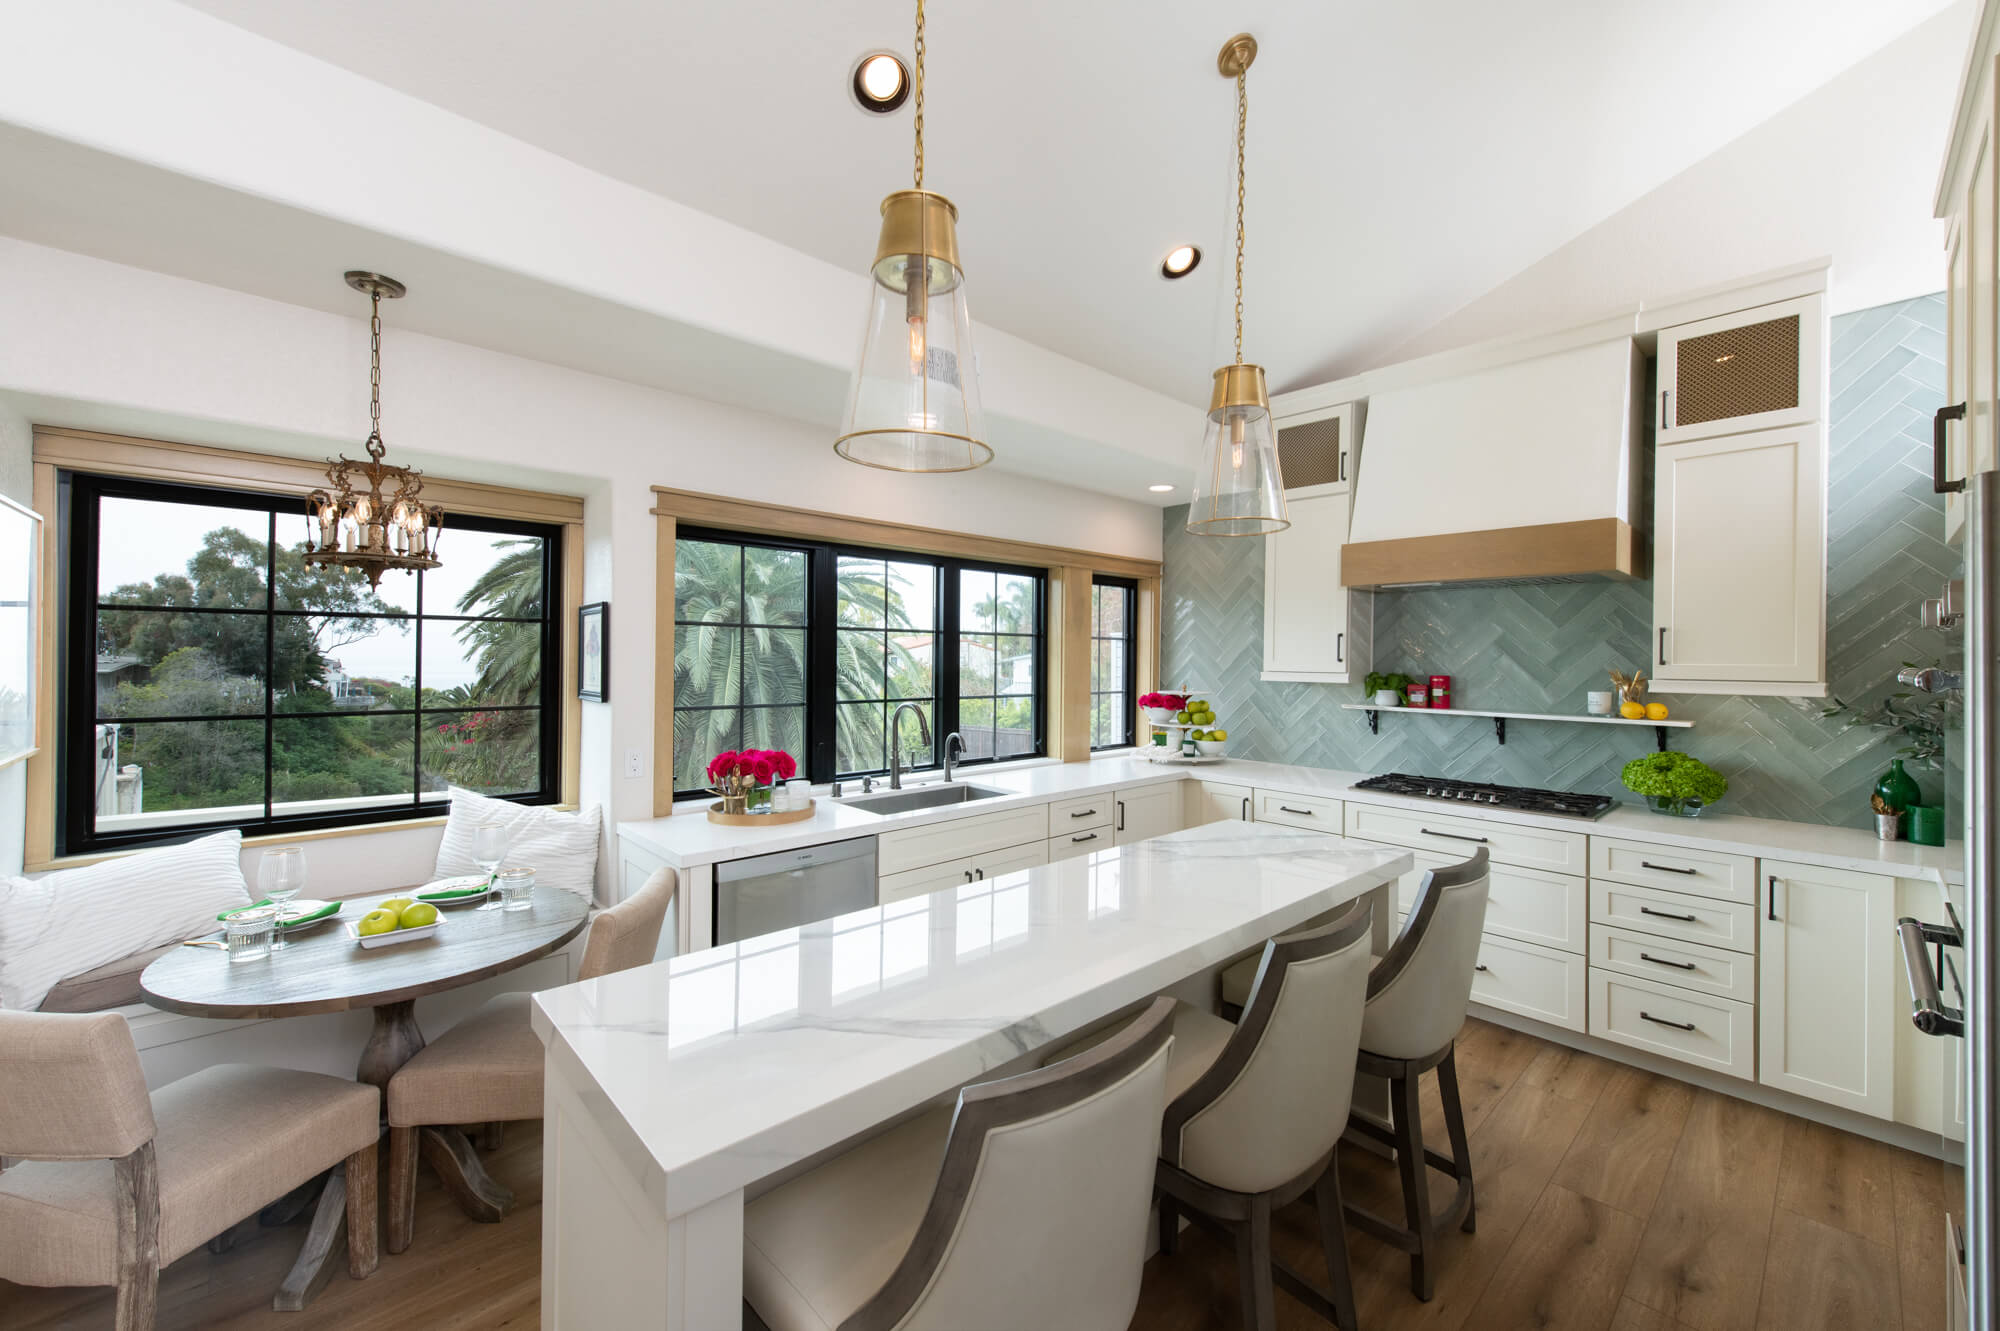 https://www.seapointe.com/wp-content/uploads/2022/05/San-Clemente-kitchen-renovation-with-long-island-and-dining-area.jpg